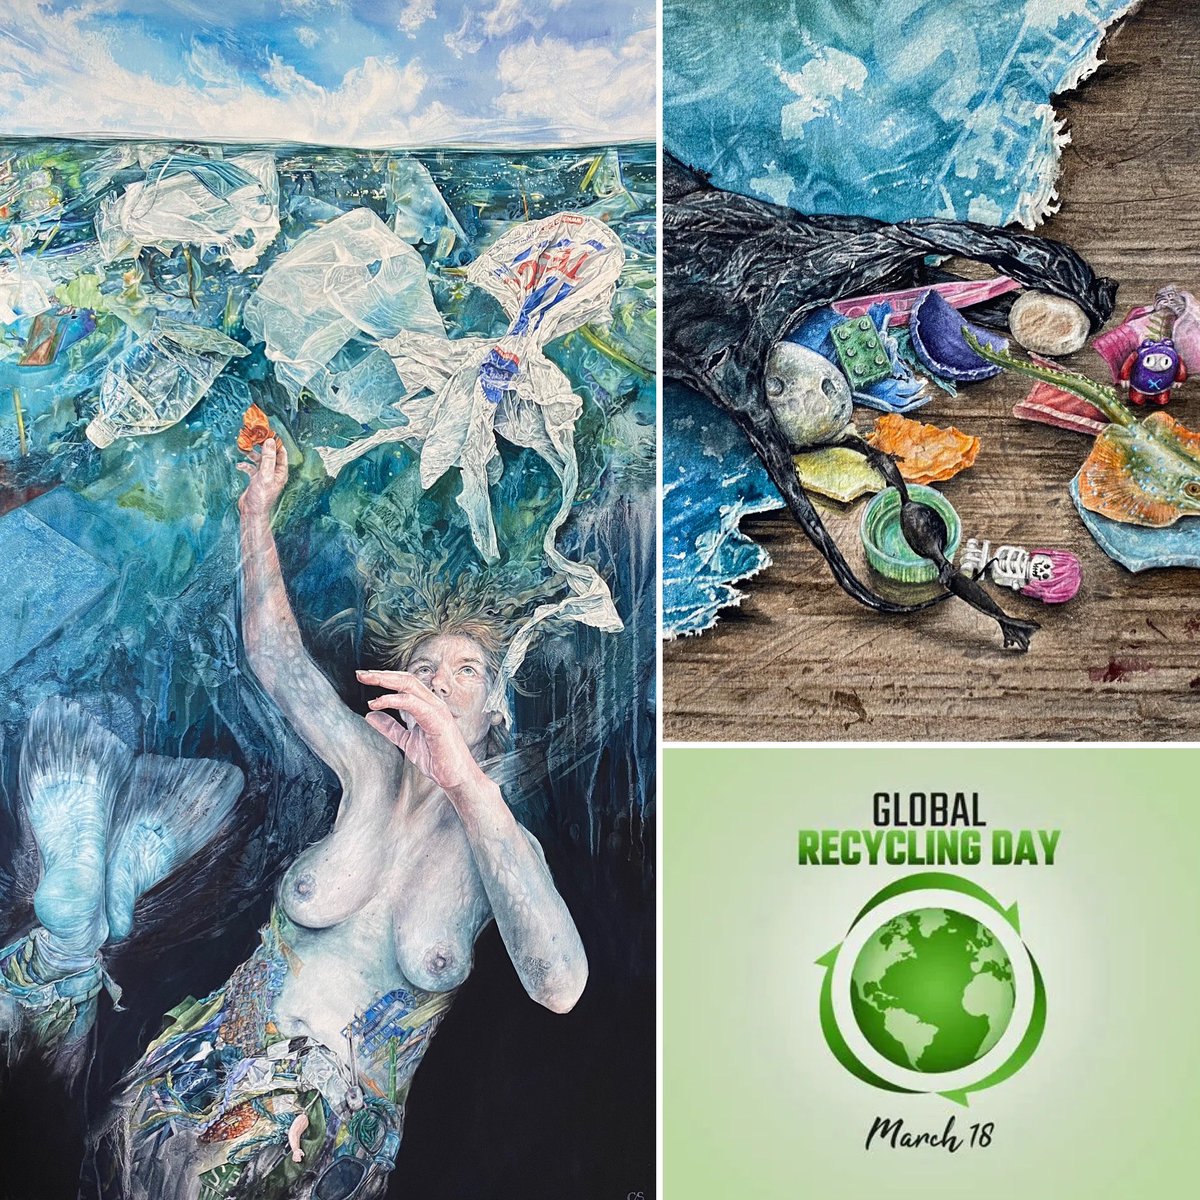 In awareness of #GlobalRecyclingDay2024 I’d like to share 2 #watercolourpaintings ‘Adrift’ & ‘Mermaid’s Purse’. Both #paintings will be exhibited in the 212th Annual #Exhibition @RIwatercolours @mallgalleries 28March - 13 April #plasticpollution #oceanplastic #nomoreplastic